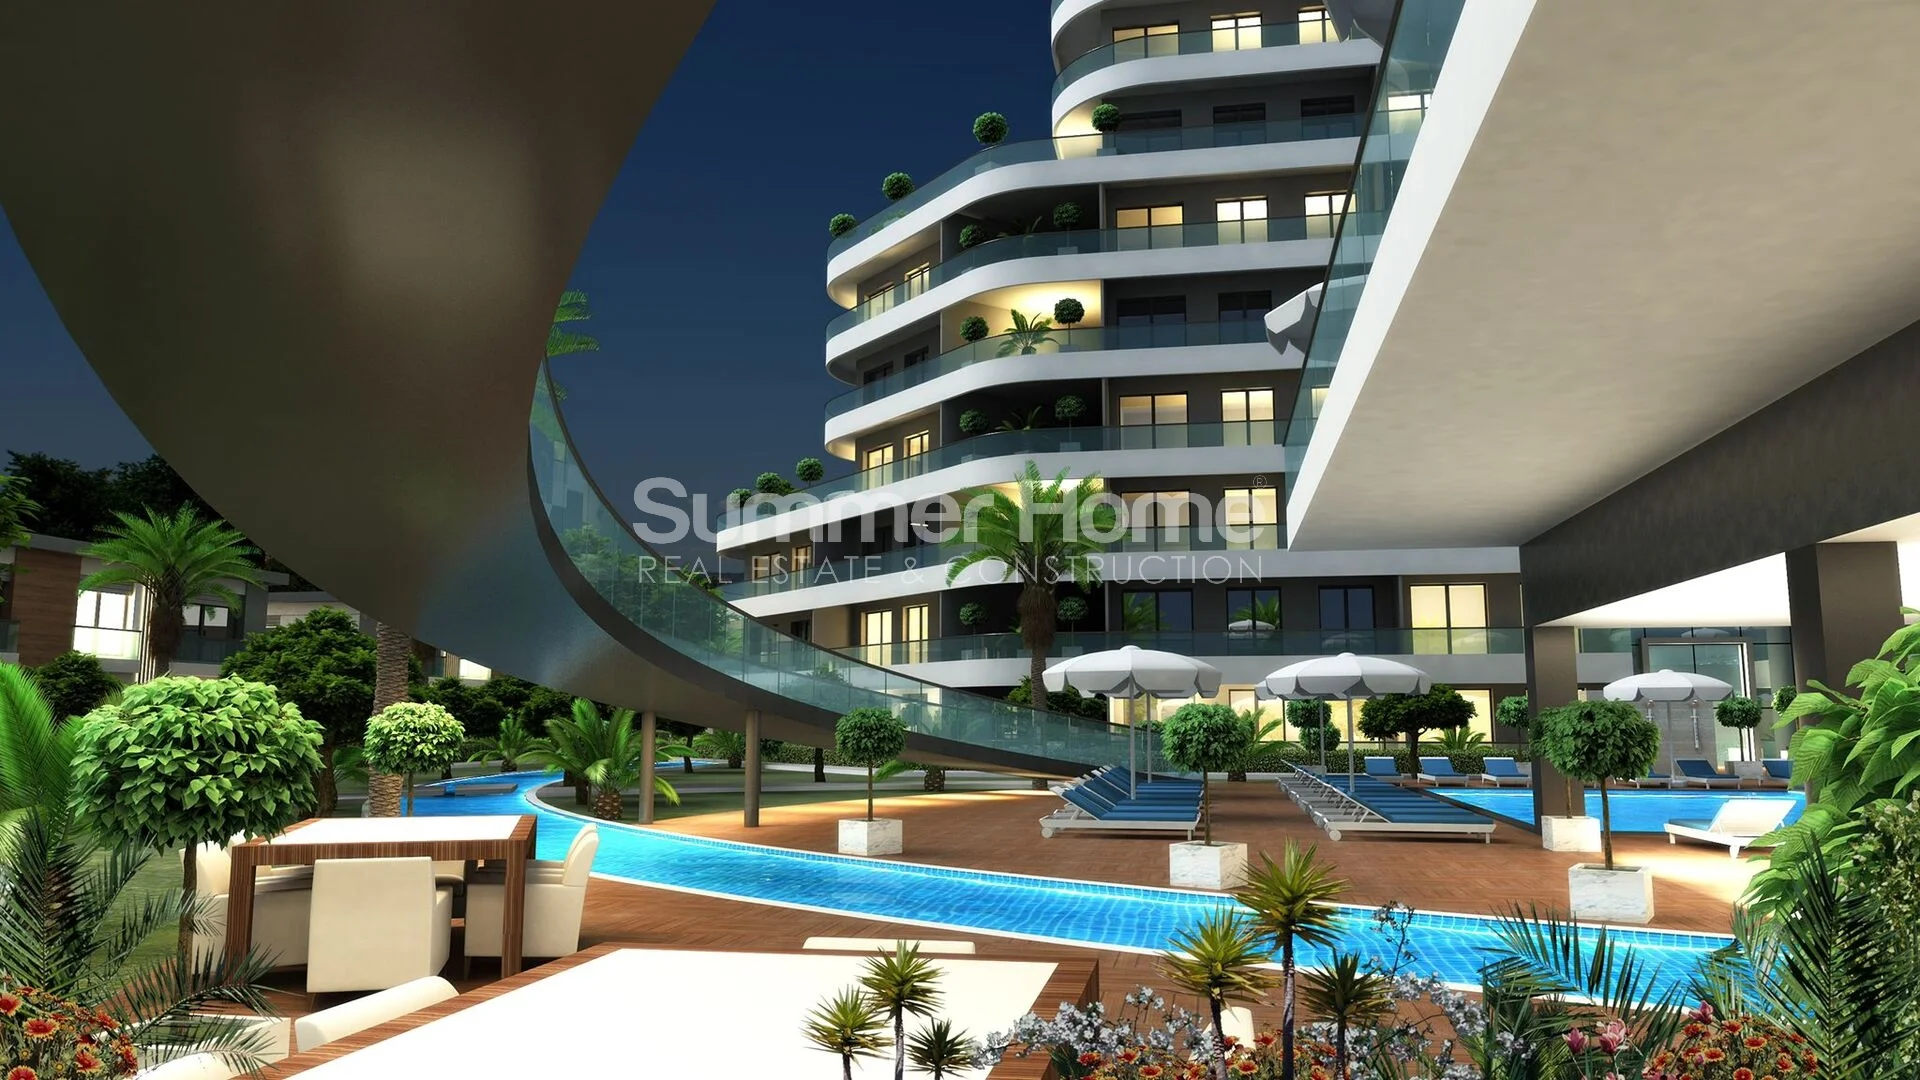 Stunning, chic apartments that are located in Altıntas general - 1